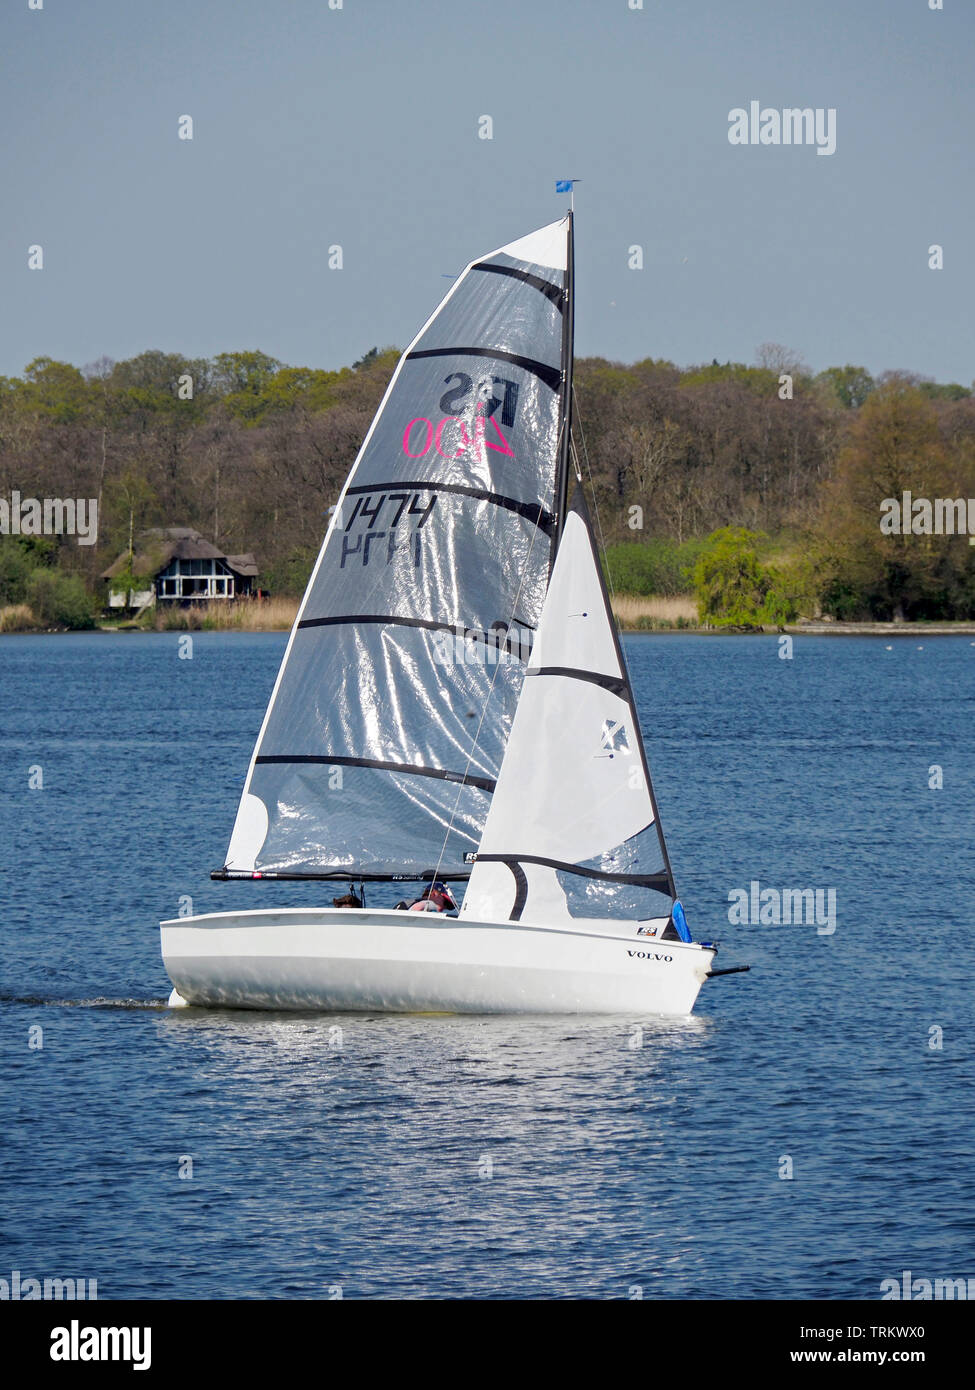 Sailing is a popular pastime on the Norfolk Broads with dinghies of various types taking part in racing and sail training on Wroxham Broad. Stock Photo